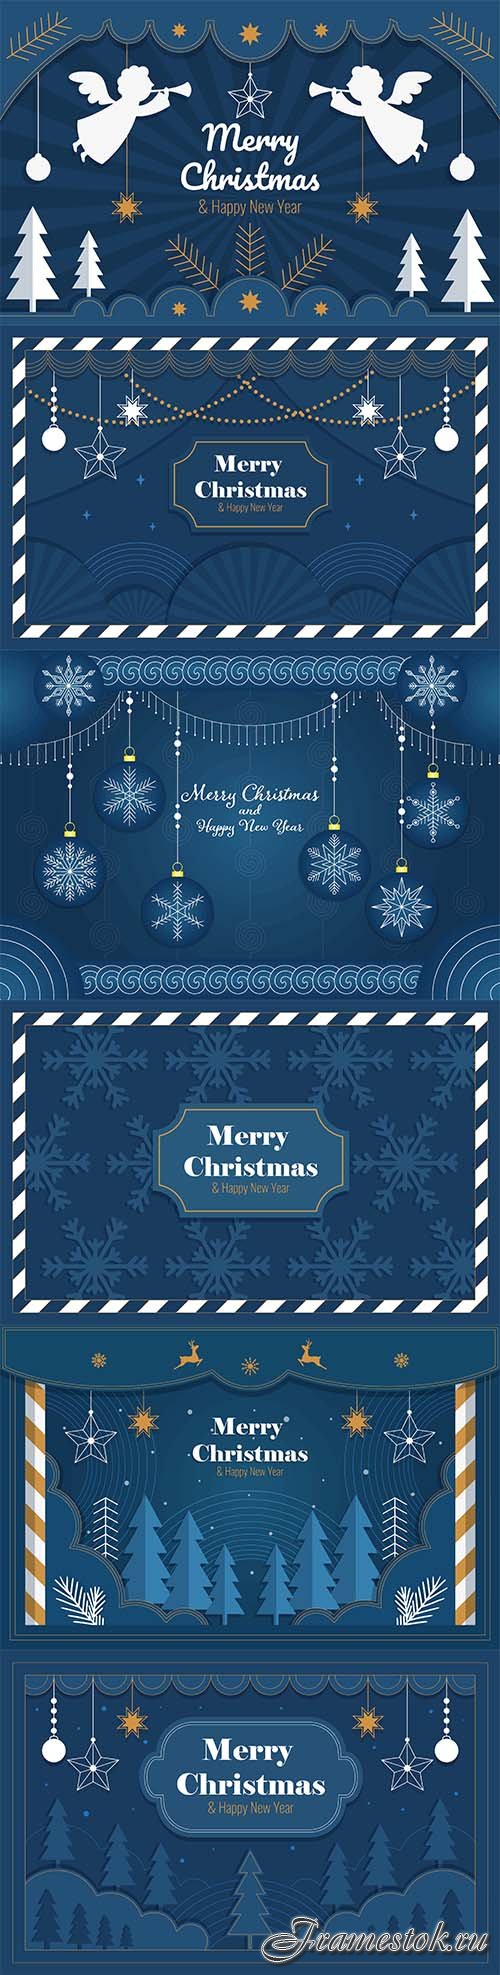 Merry christmas and happy new year banner with toys snowflakes and abstract objects